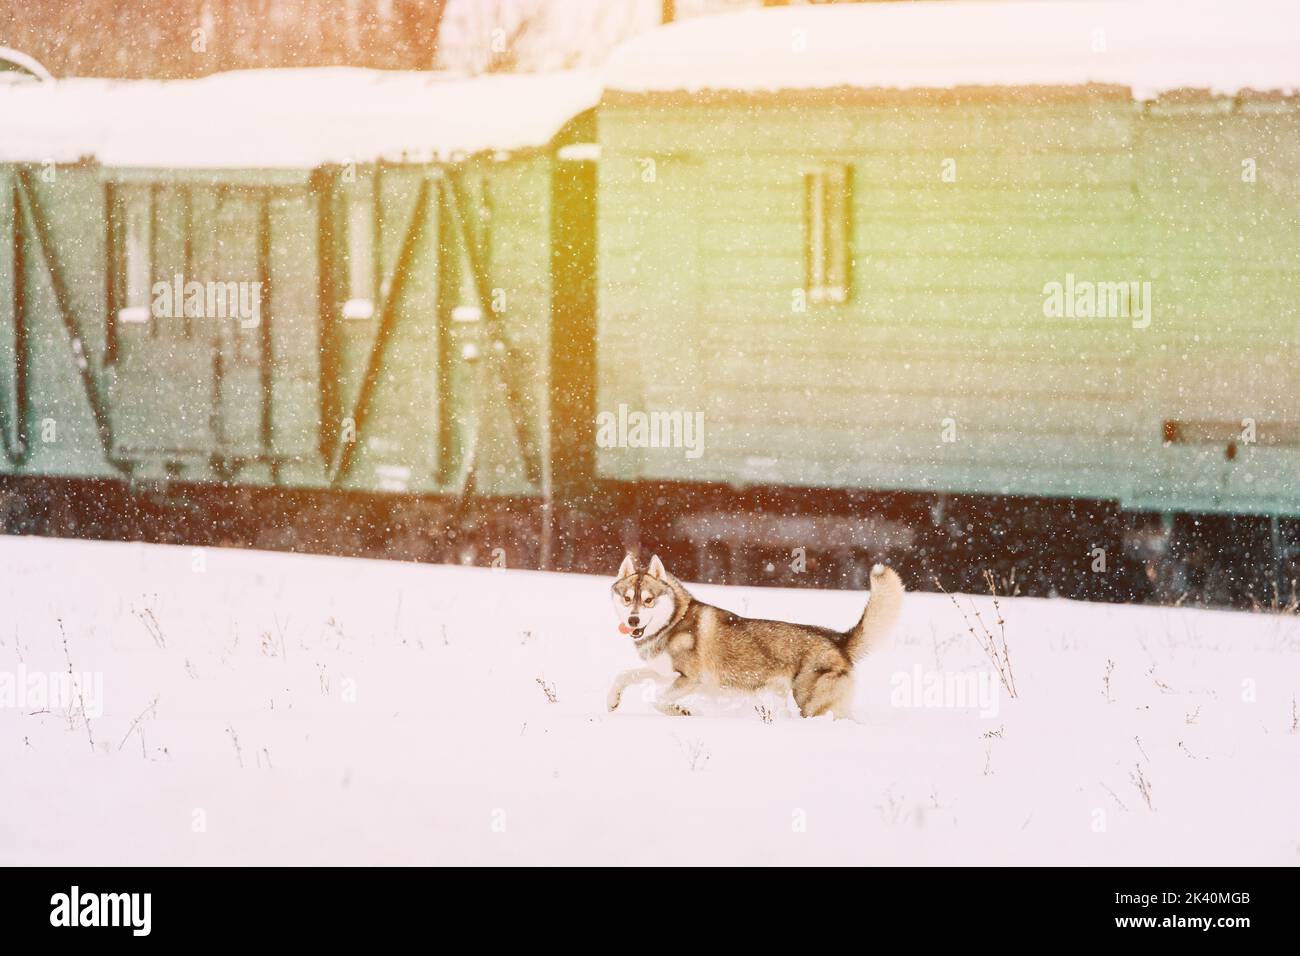 Young Husky Runs Playfully Through Snowdrifts Against Background Of Railway Cars. Dog Play Outdoor In Snow, Winter. Husky On Winter Walk Stock Photo